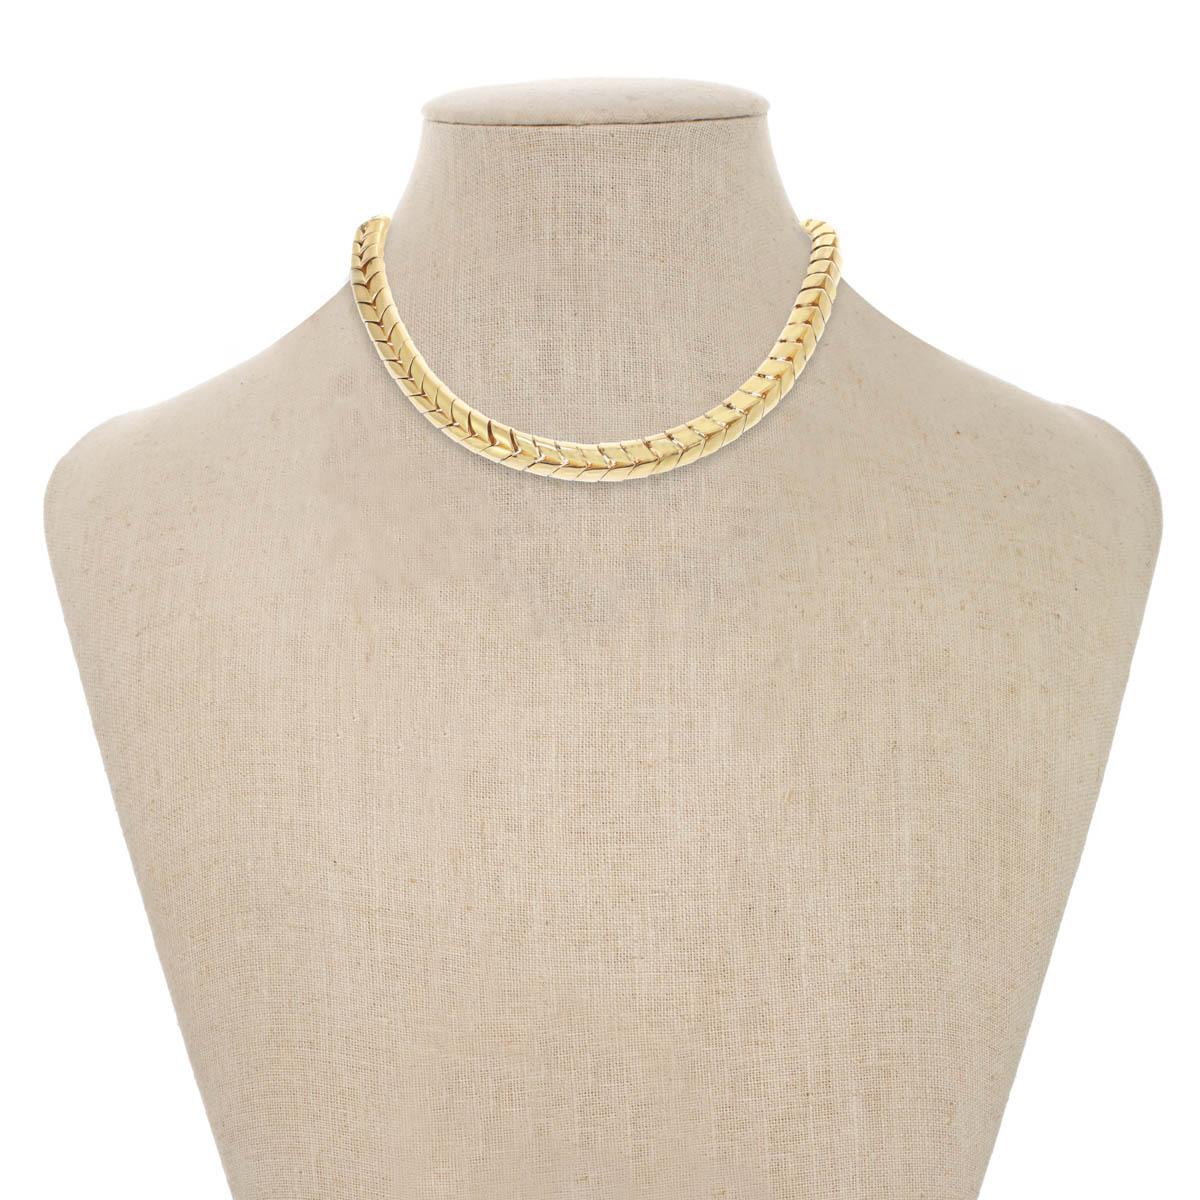 Bold and beautiful! Sophistication at its finest, this gold necklace will be your  go to for seasons to come! 
Materials
Pewter
18K Gold Plating
Box and Tongue Clasp 
Dimensions 
16